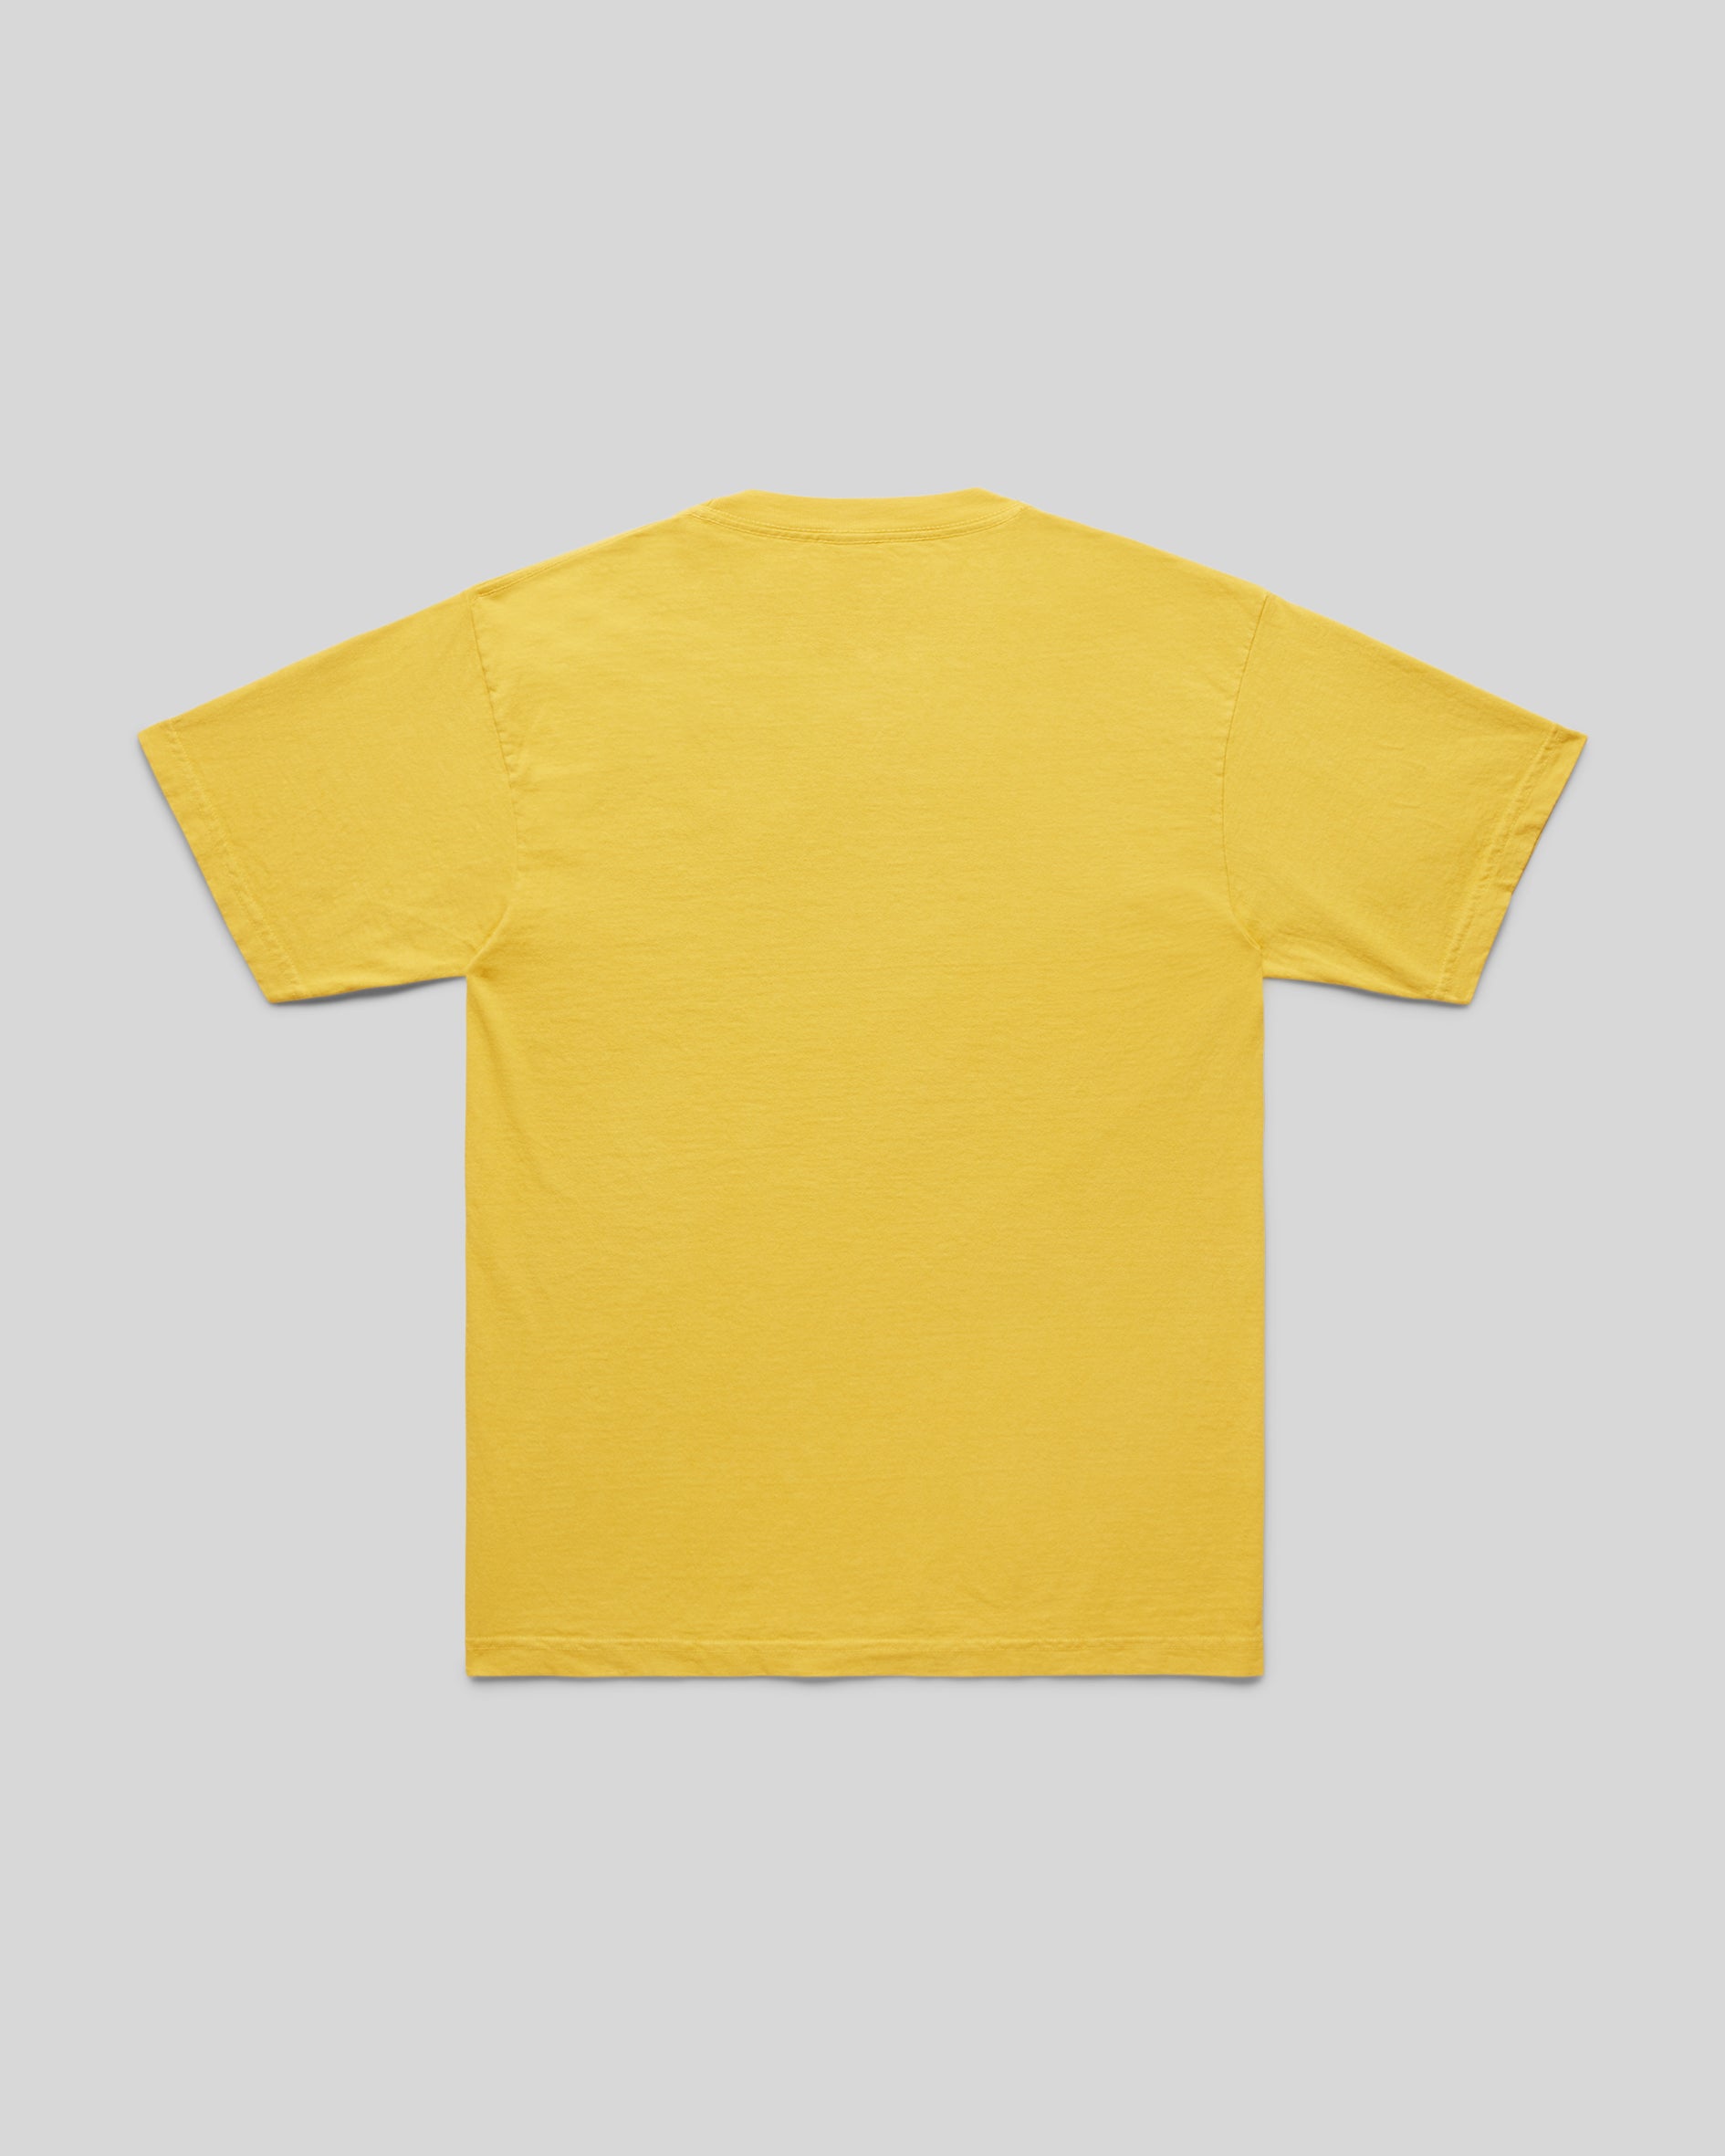 1987 Luna Luna T-Shirt in Yellow. Rear photograph of yellow t-shirt with black text at chest that reads "LUNA LUNA"